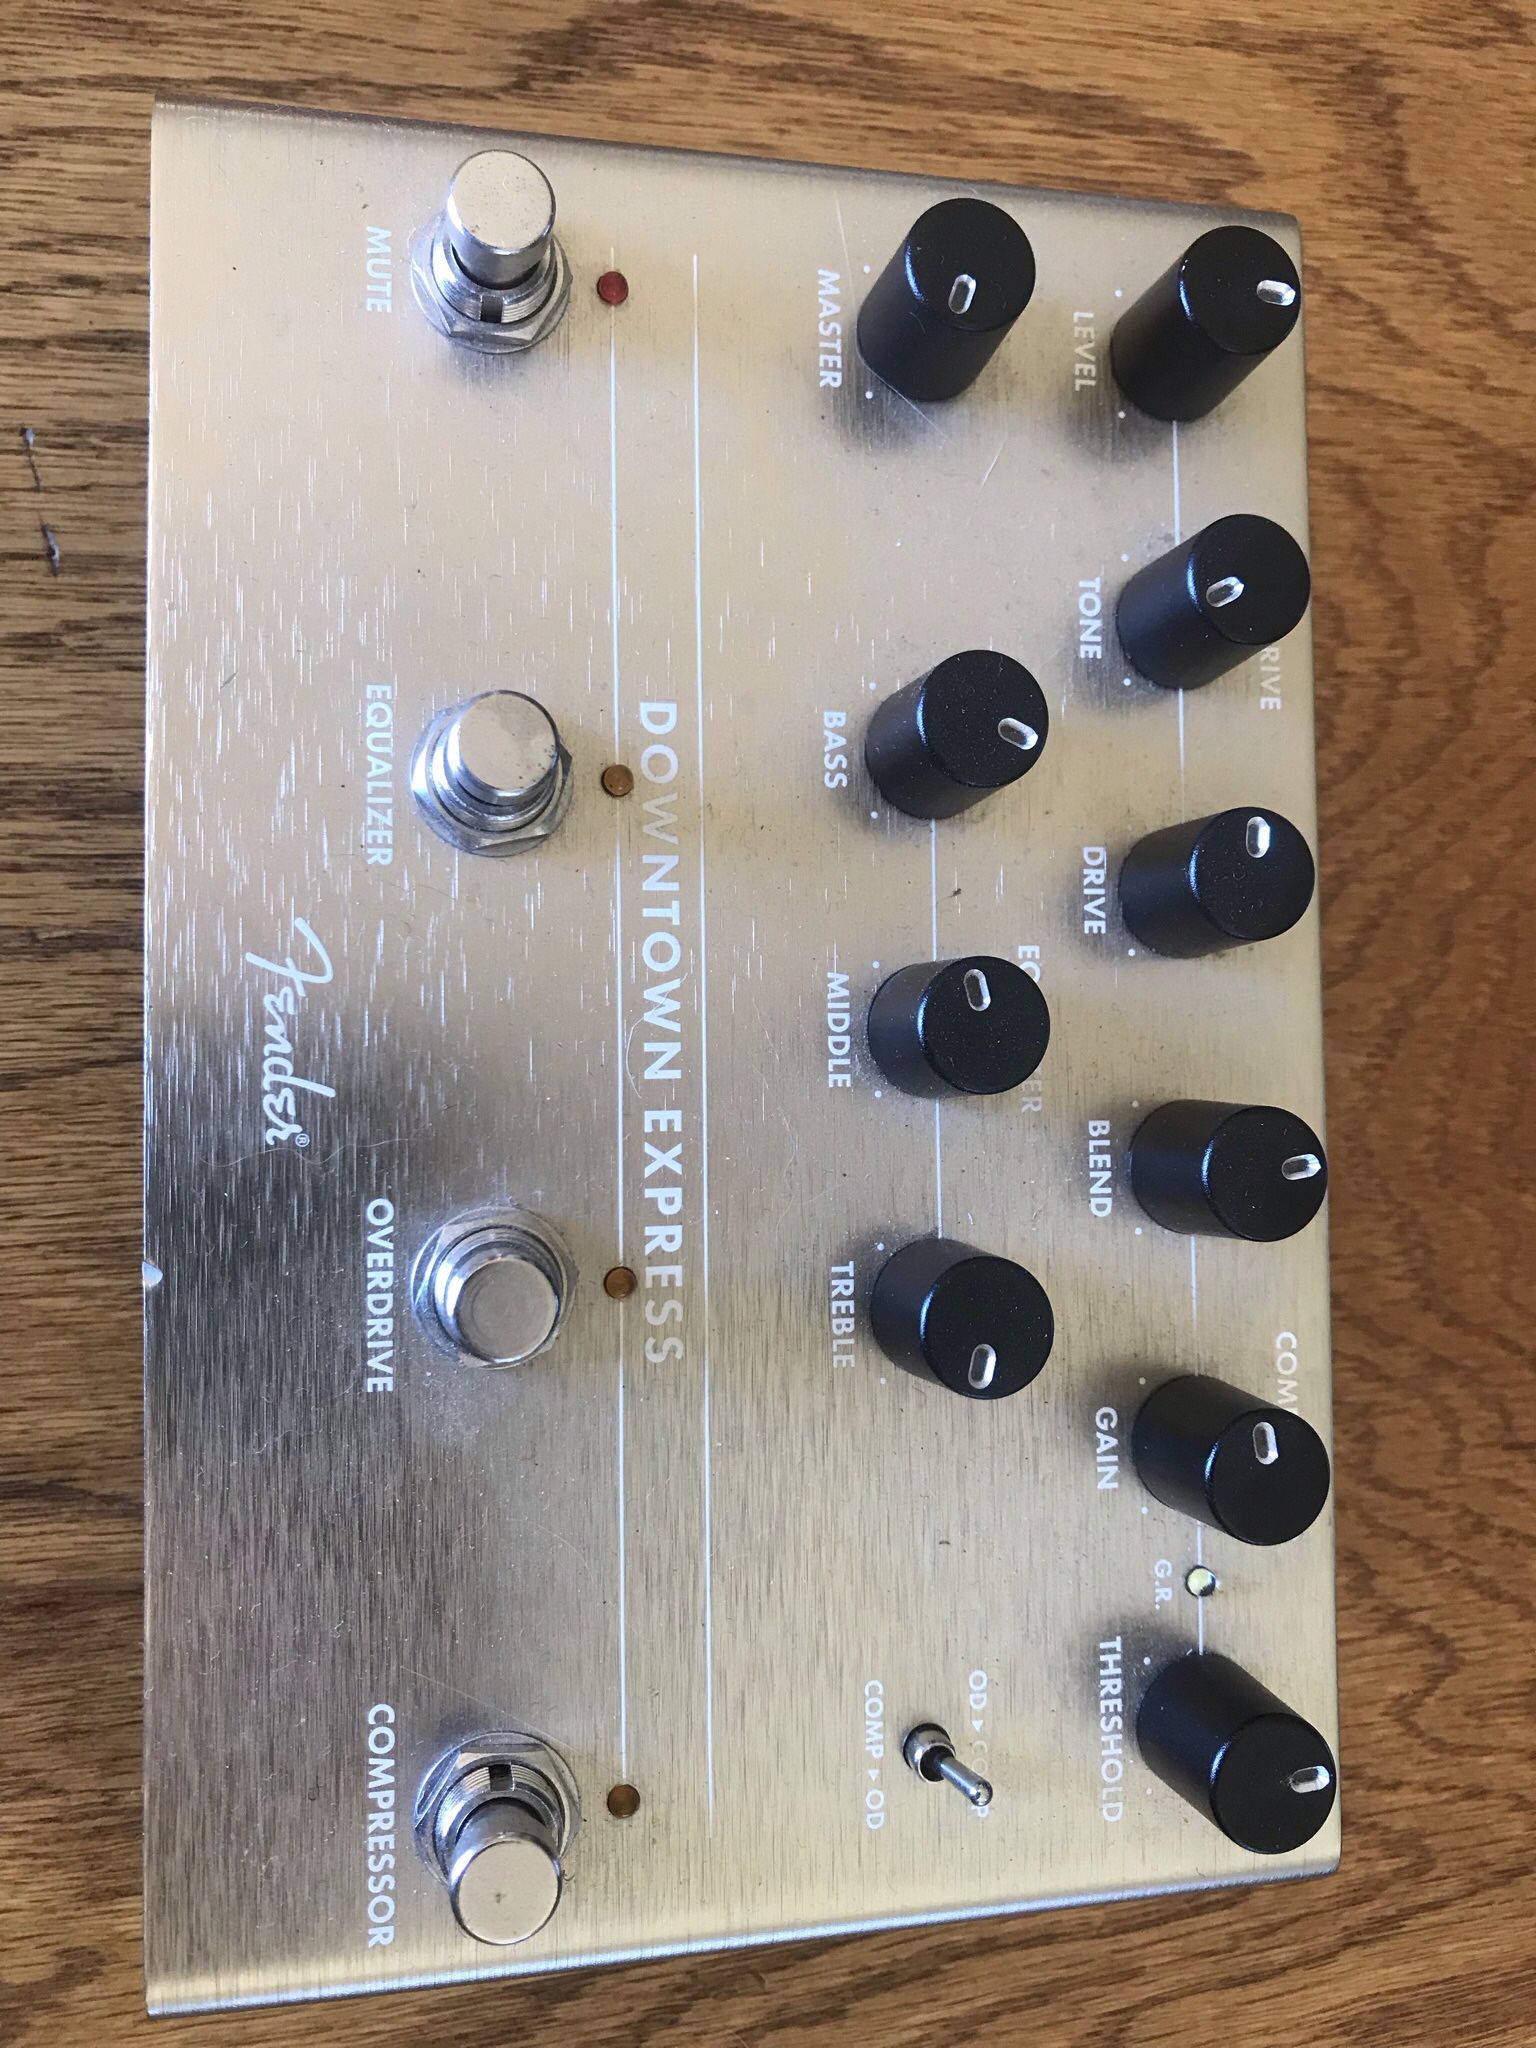 Fender Downtown Express Bass Multi Effects for Sale in Yucca